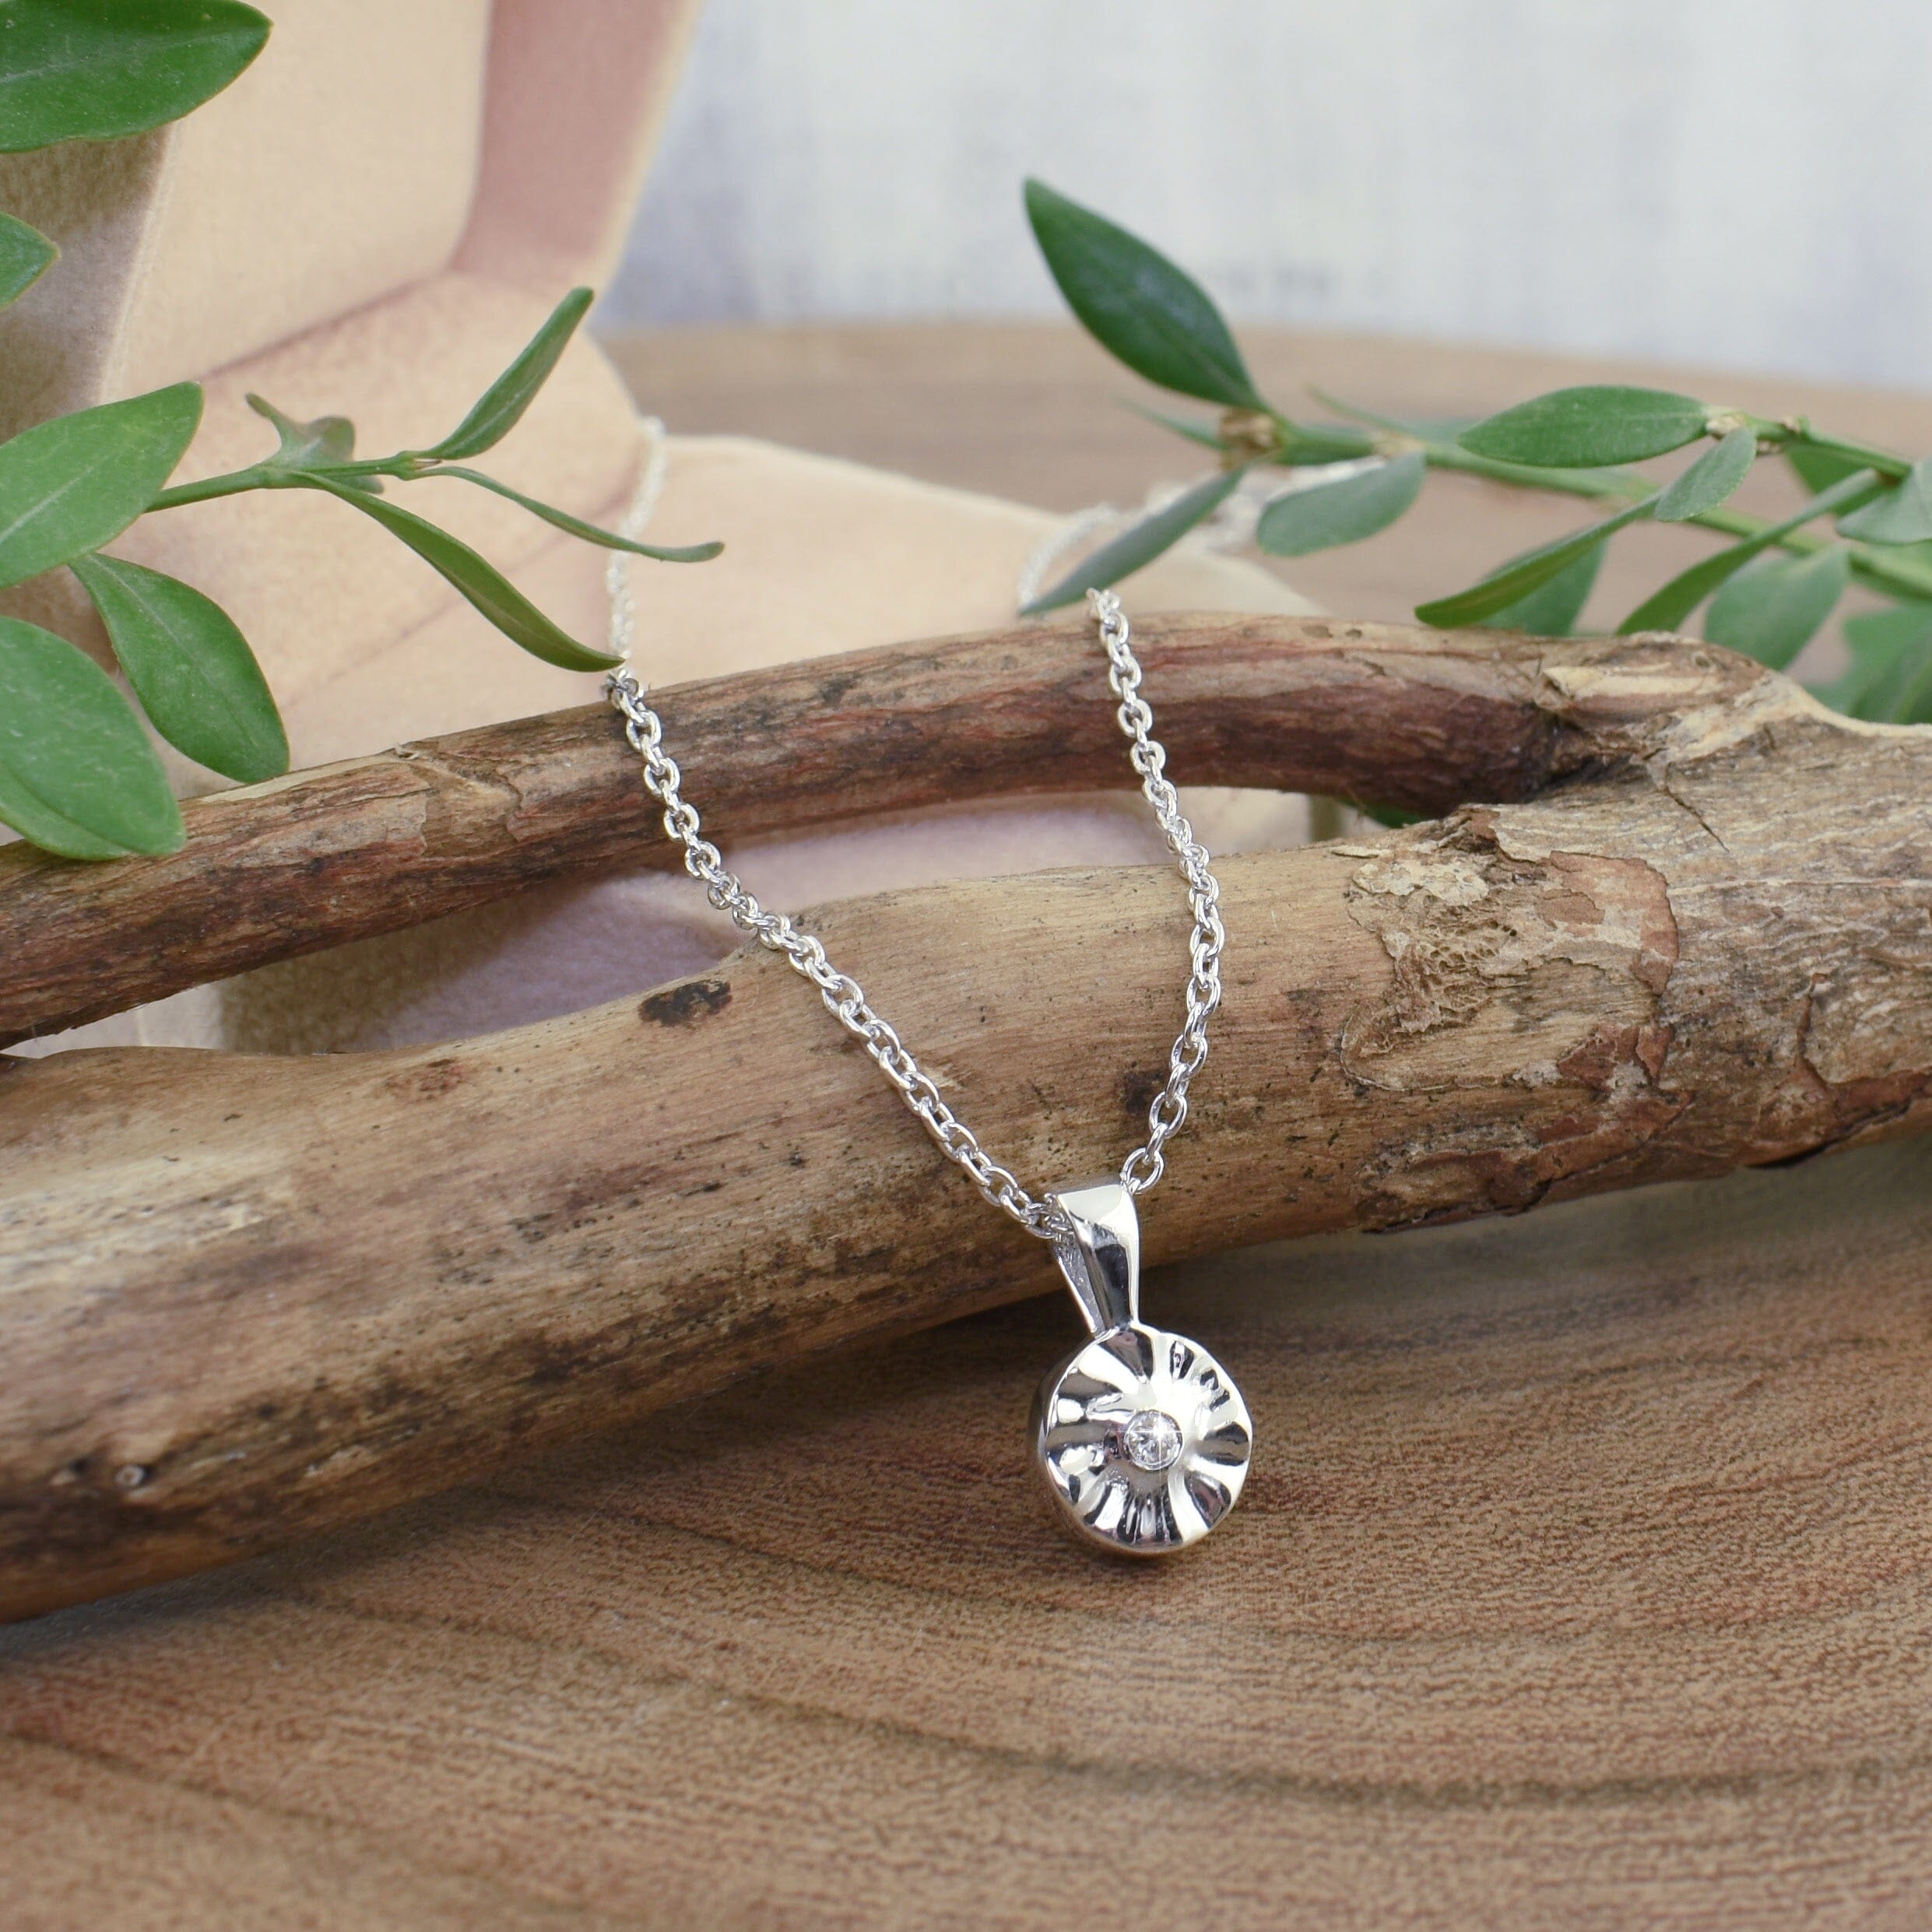 dainty .925 sterling silver flower necklace featuring a tiny diamond